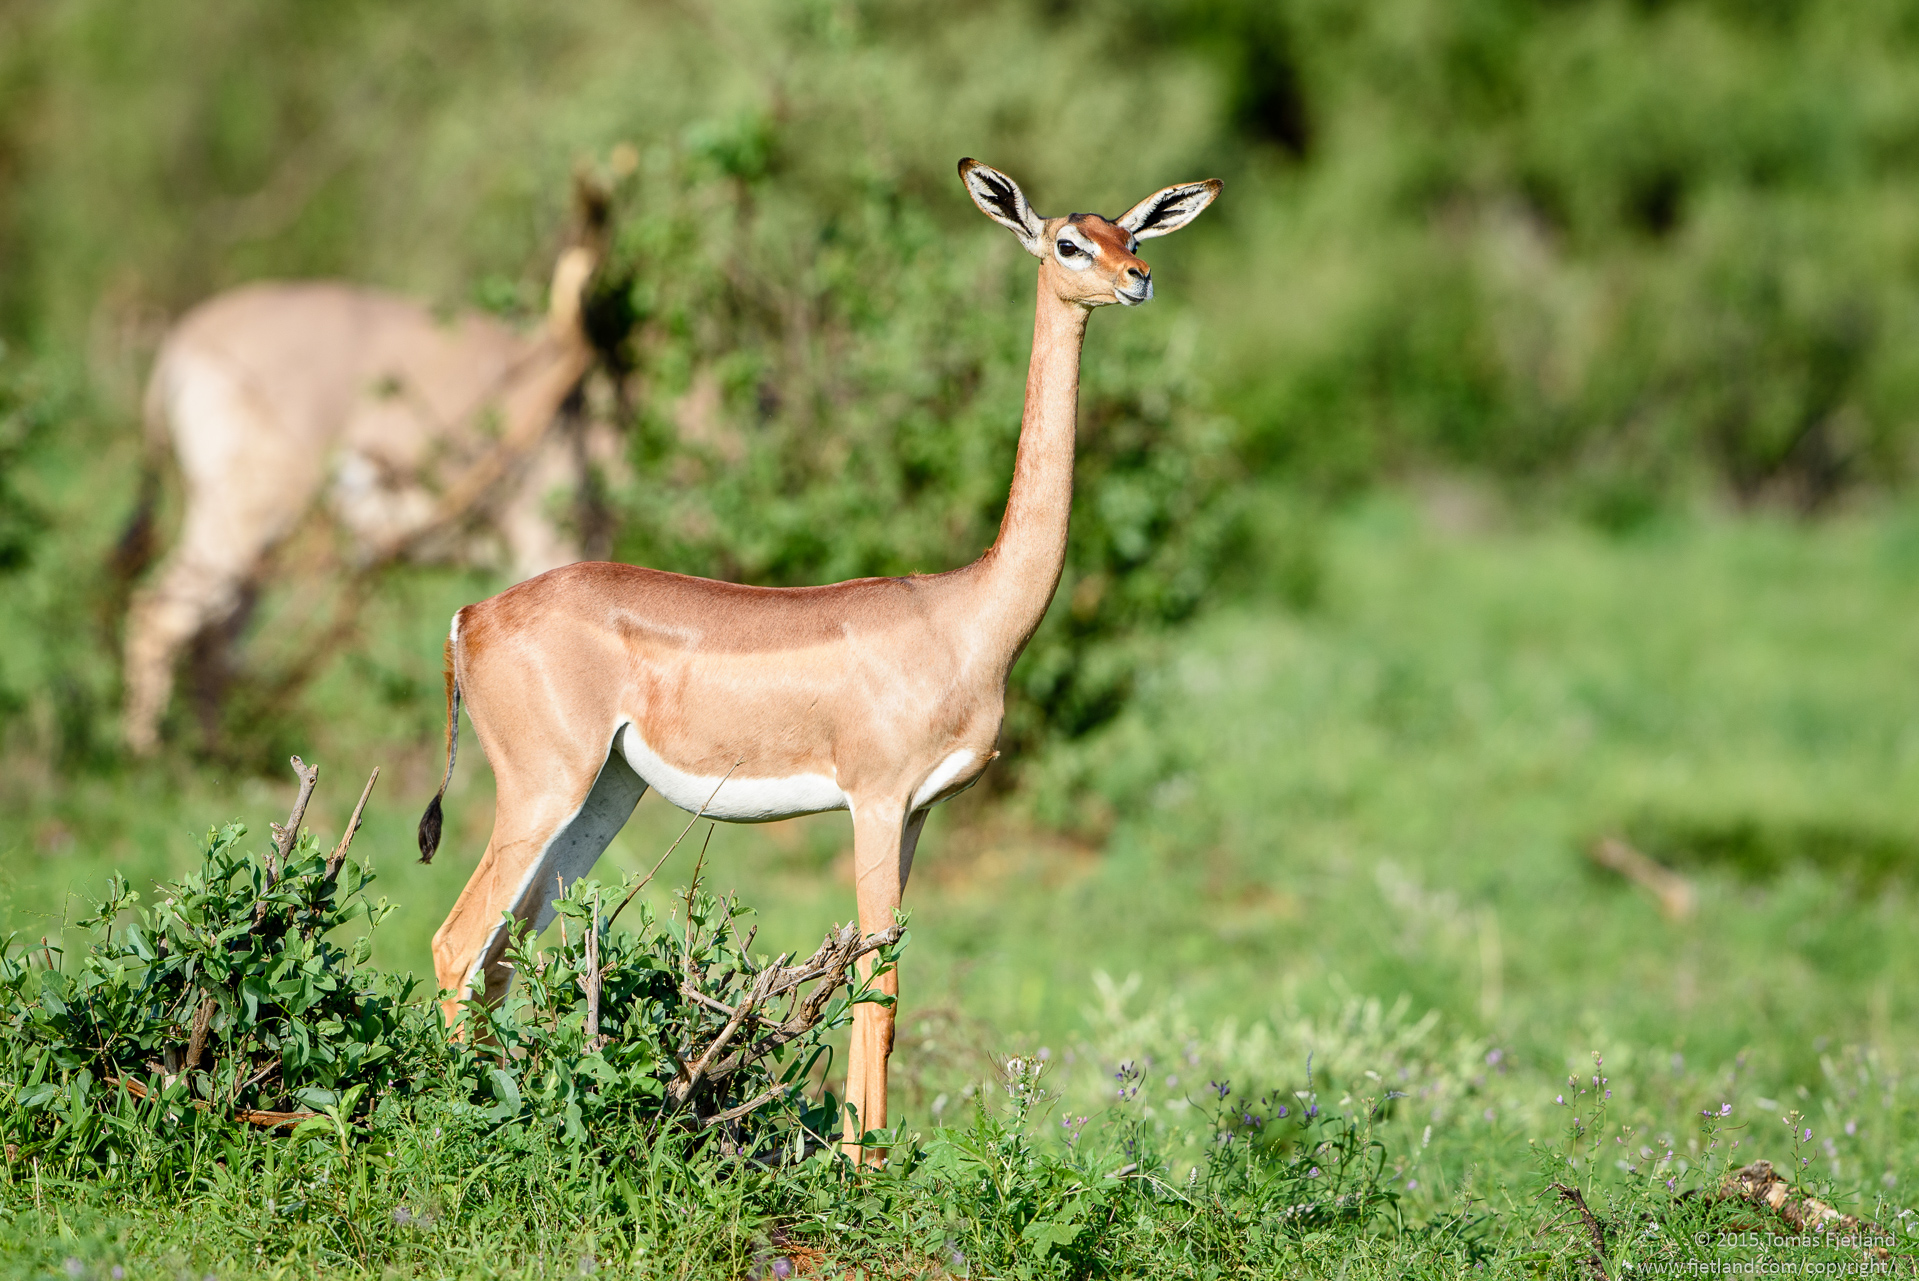 Gerenuks are unique among antelopes in that they can stand on their hind legs to reach leaves too high for other antelopes to eat. Combined with their very long neck, they are then in competition only with giraffes and elephants for food.